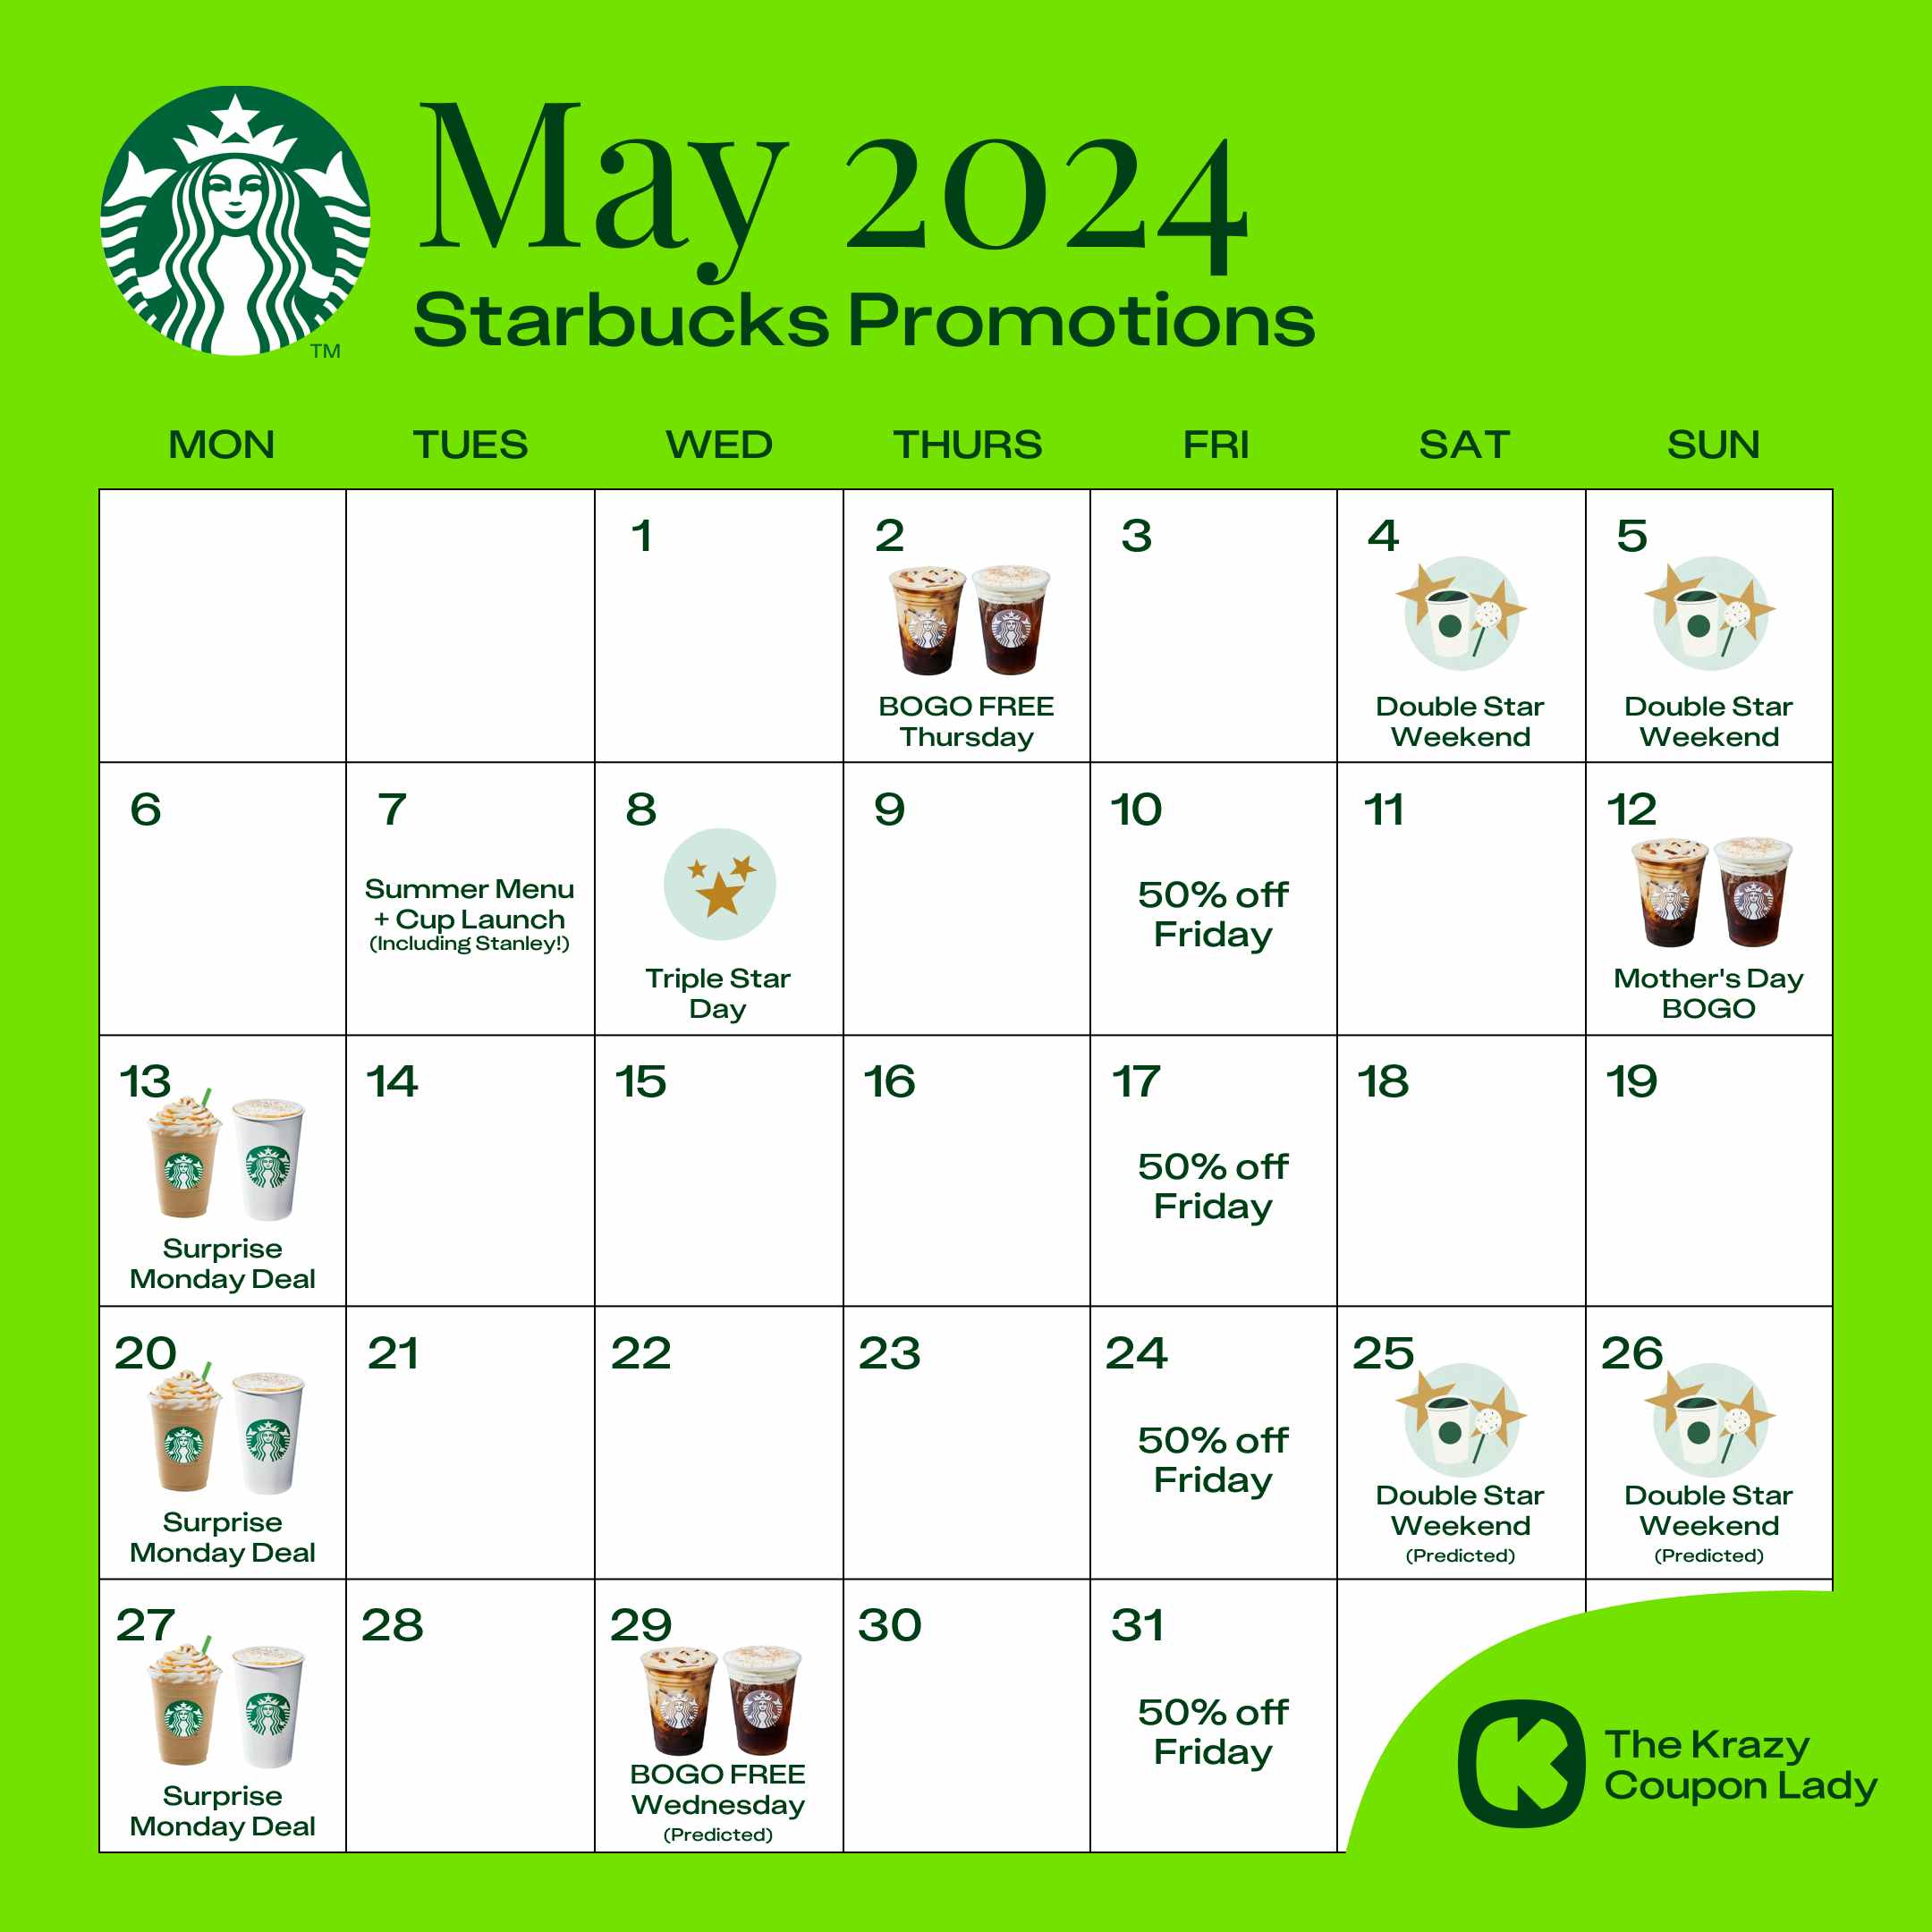 Starbucks Promotions May 2024